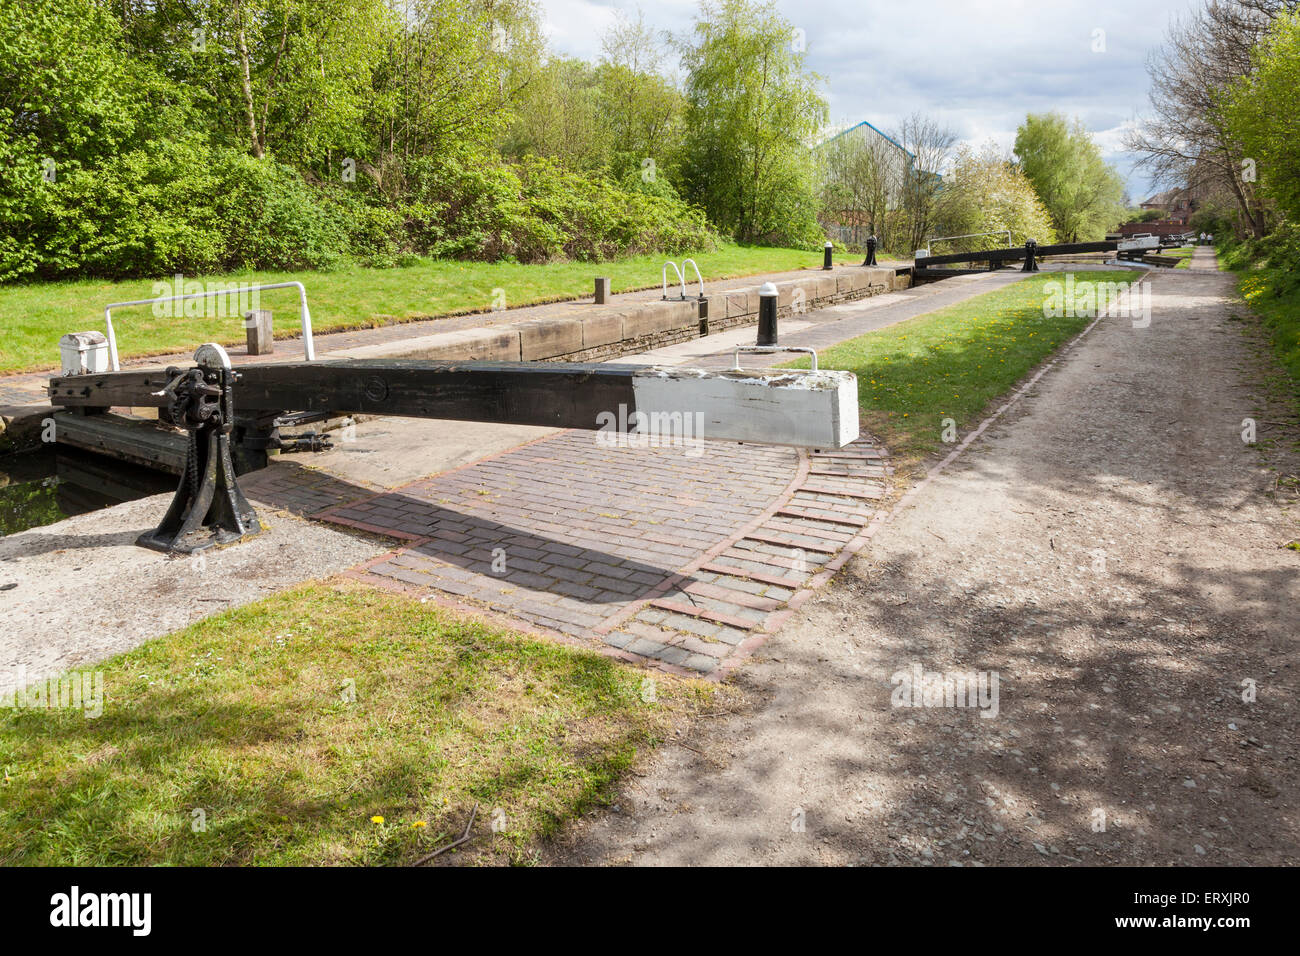 The balance beam and towpath at Lock number 3 on the Walsall Branch Canal, West Midlands, England, UK Stock Photo